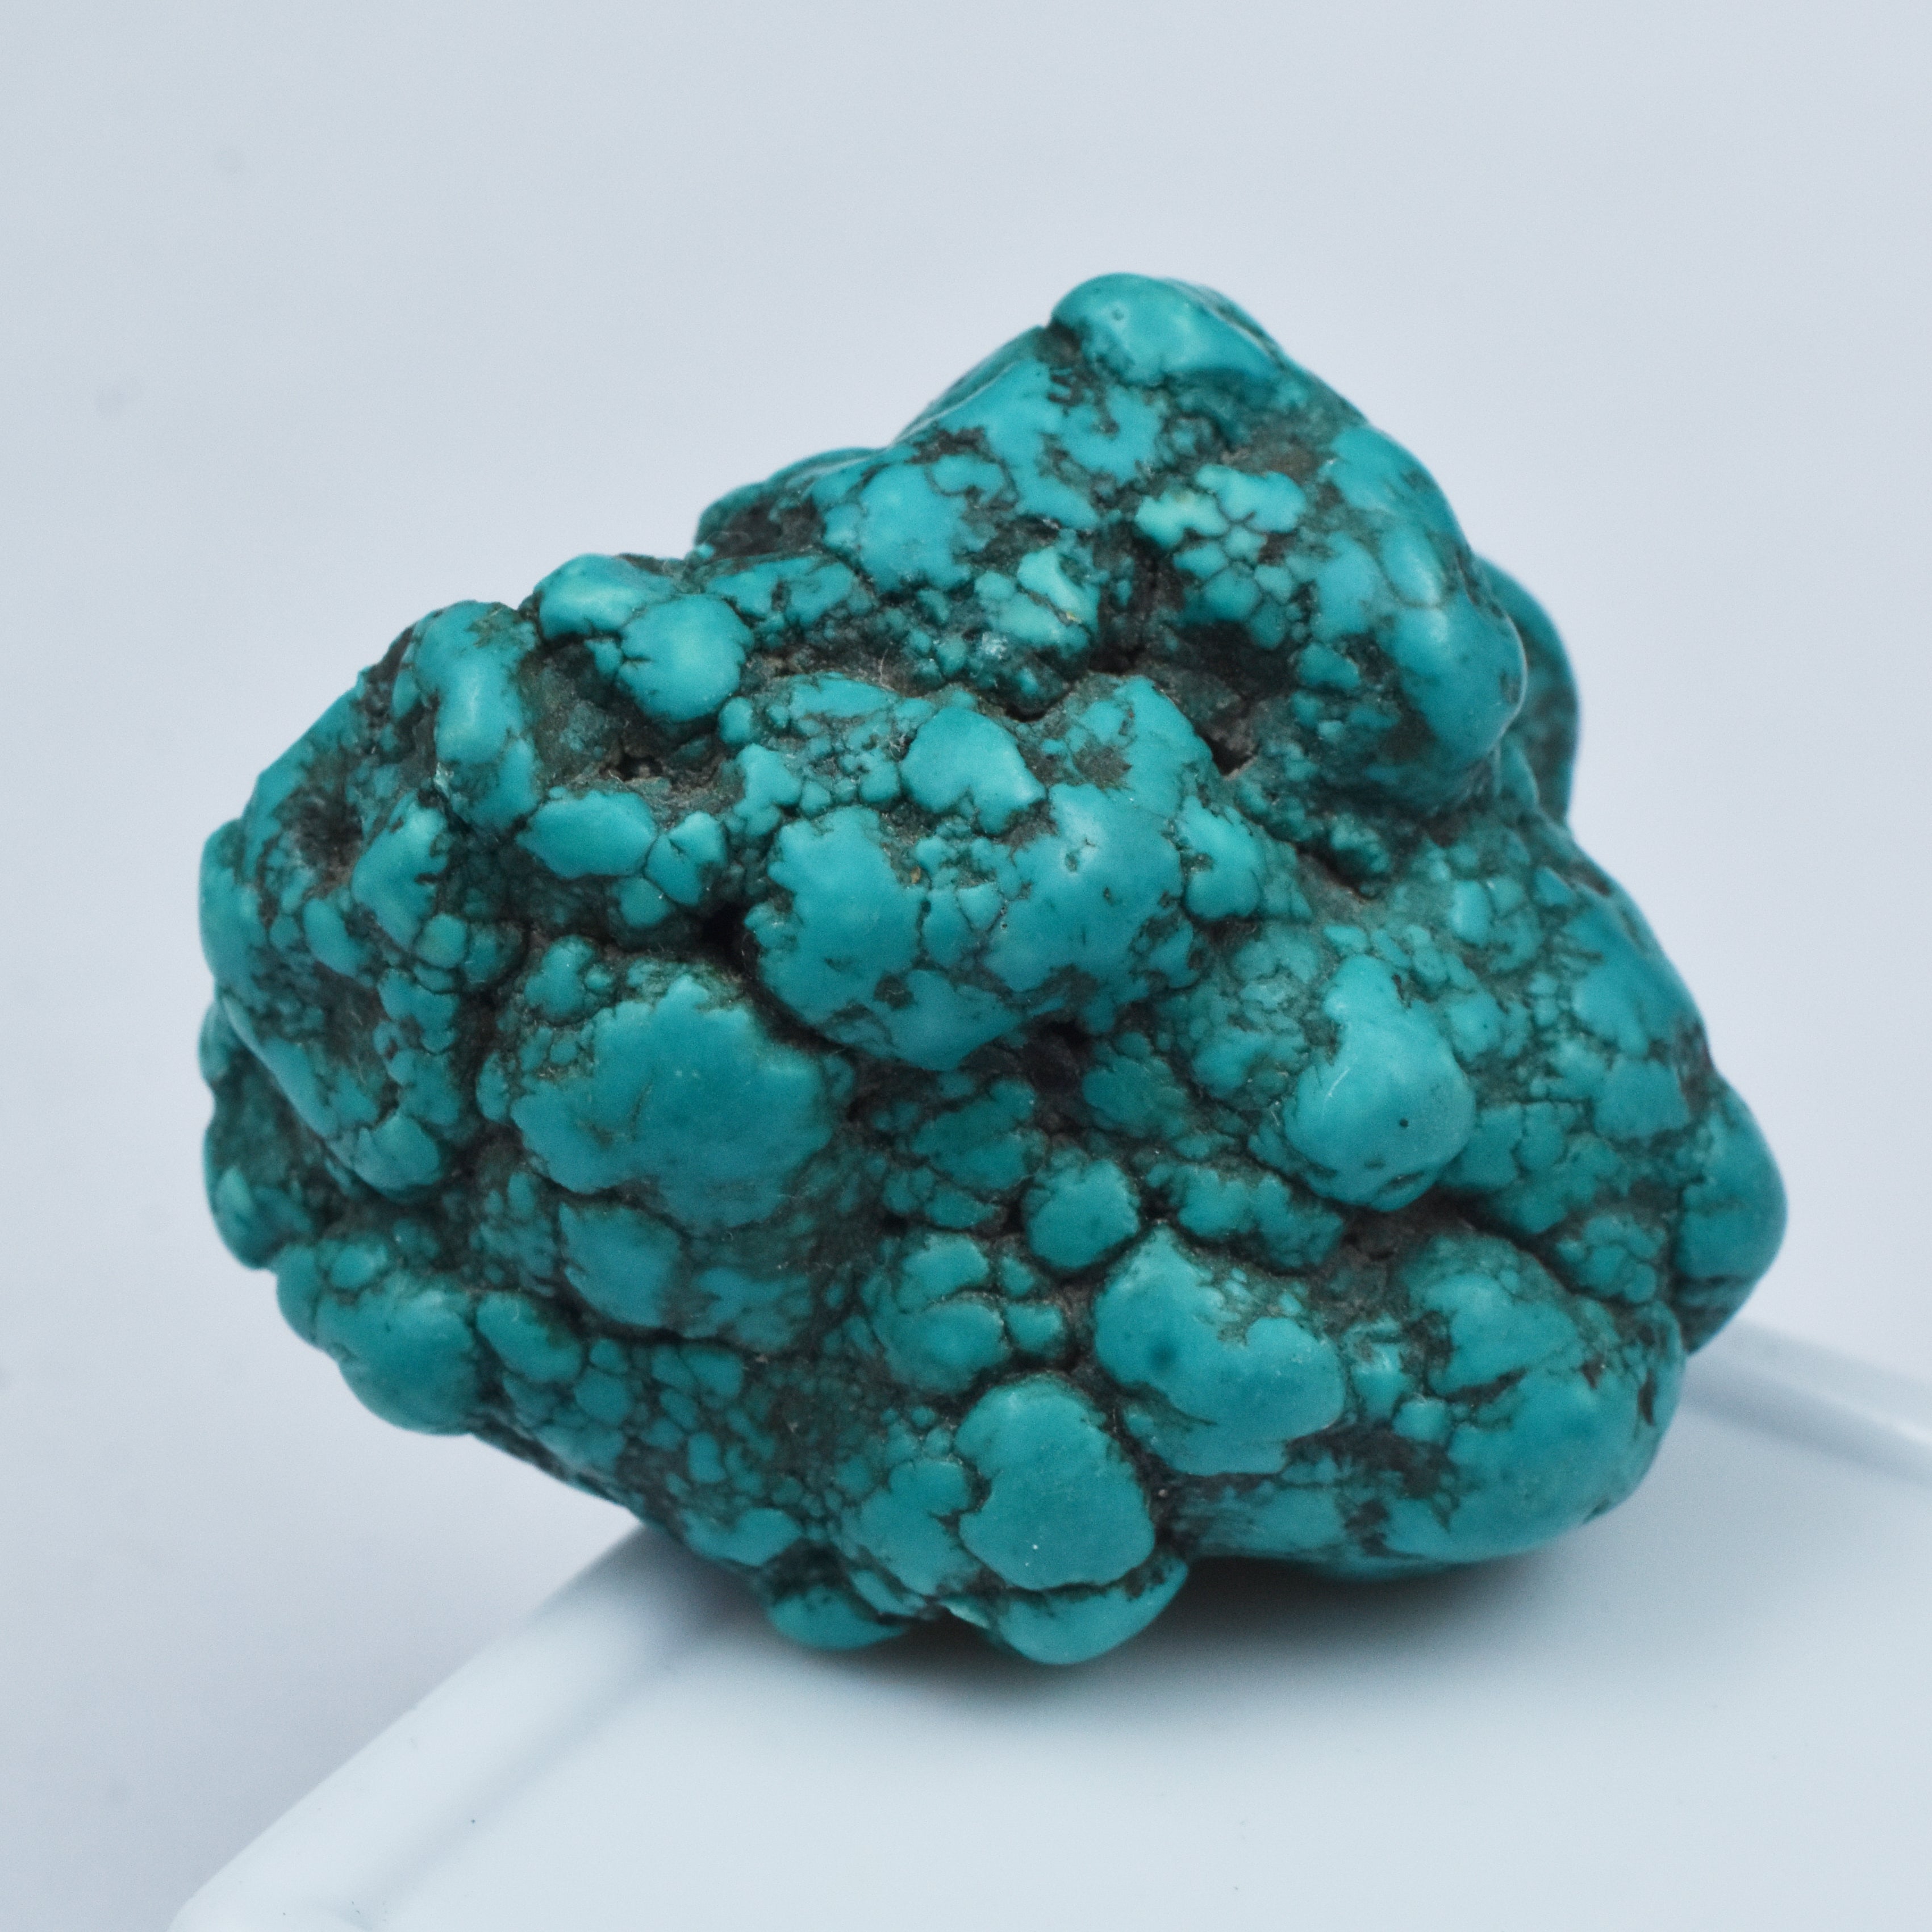 Exclusive Piece 500-550 Carat Sky Blue Turquoise Natural Loose Gemstone Rough Certified Turquoise Rough Raw Gemstone Mineral Specimen Base Free Shipping Free Gift